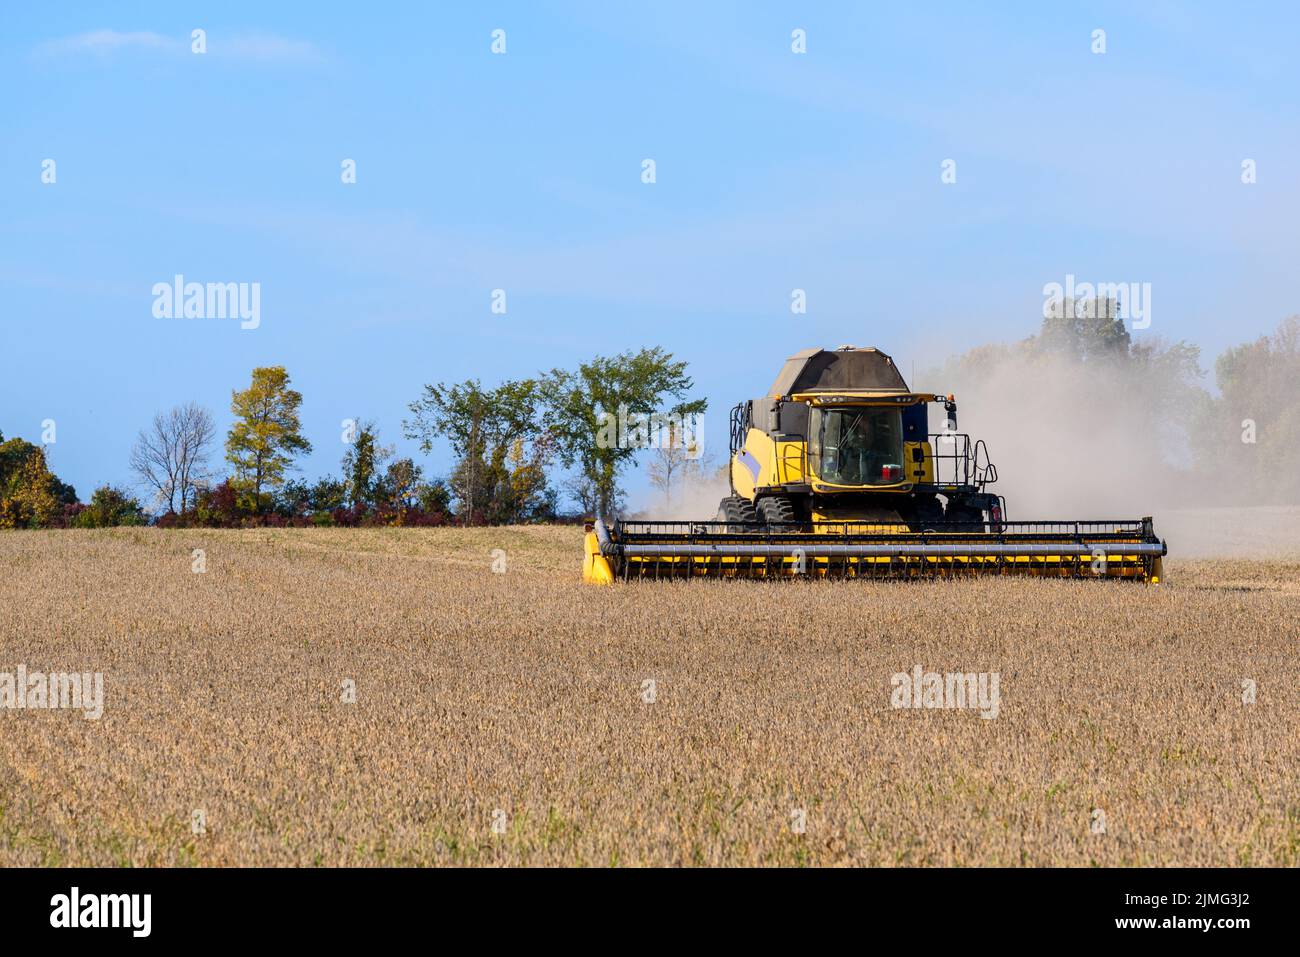 Combine harvester iharvesting wheat crops on a clear autumn day Stock Photo